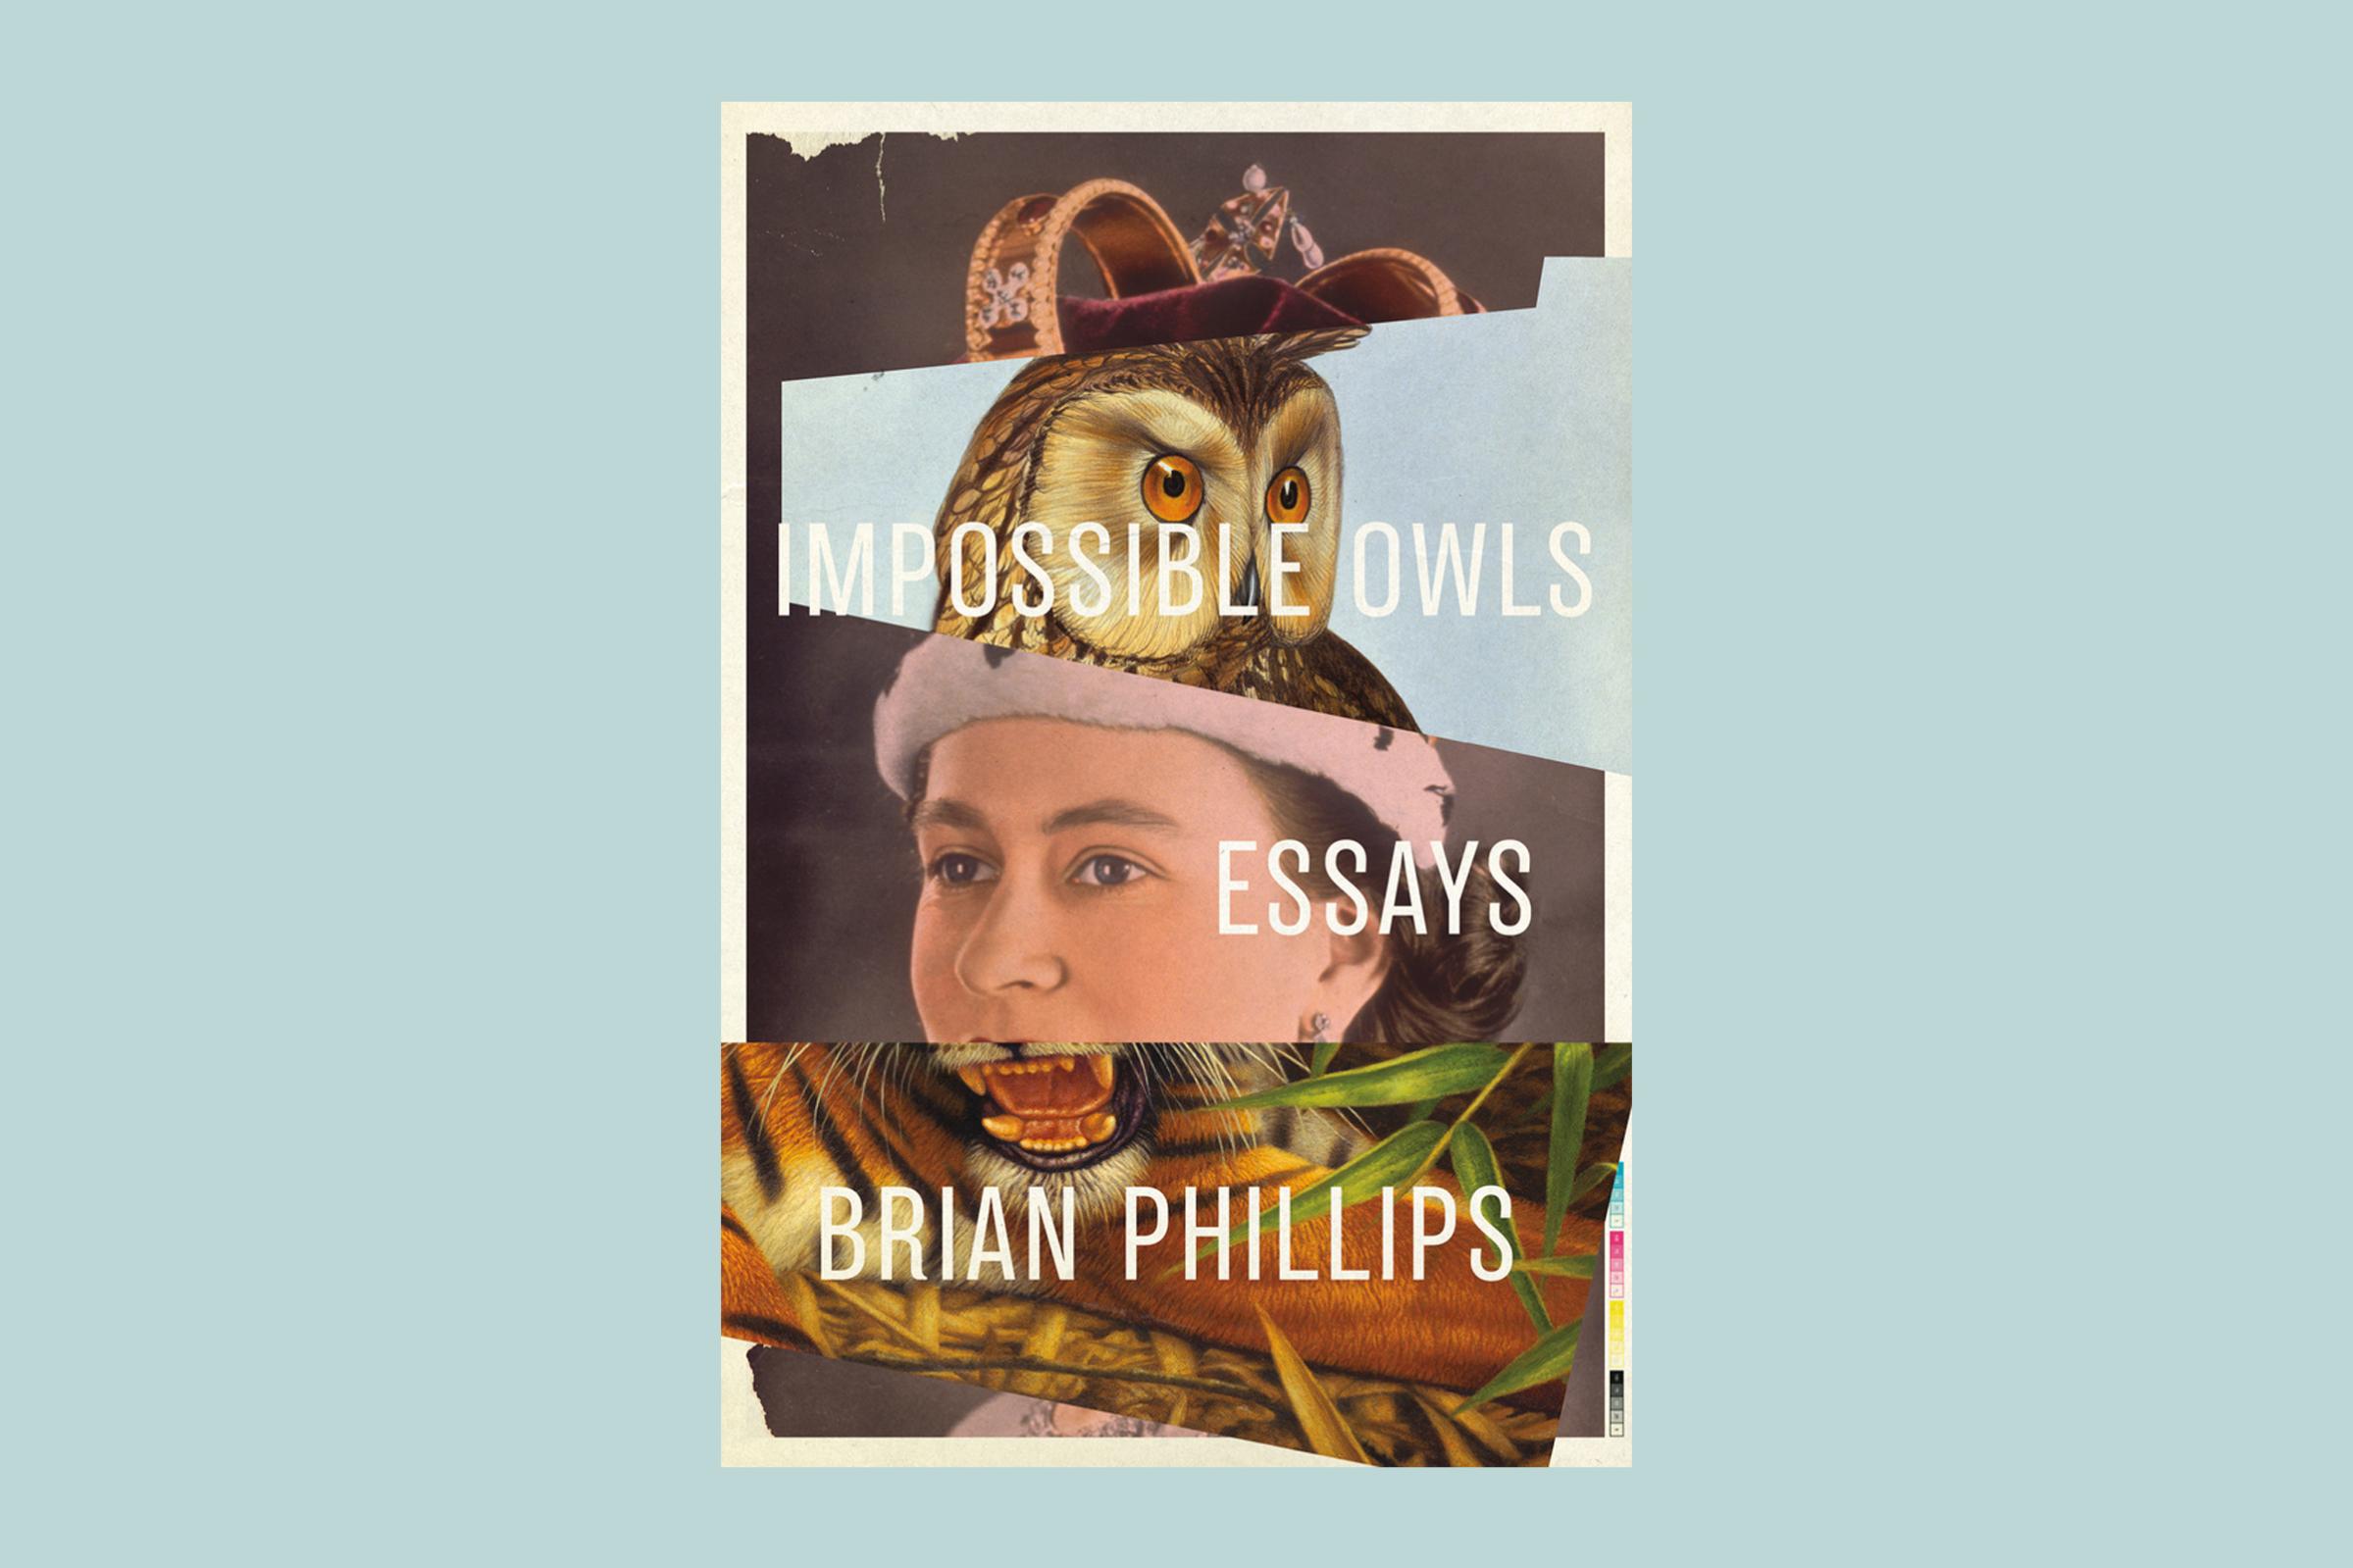 Impossible Owls Brian Phillips